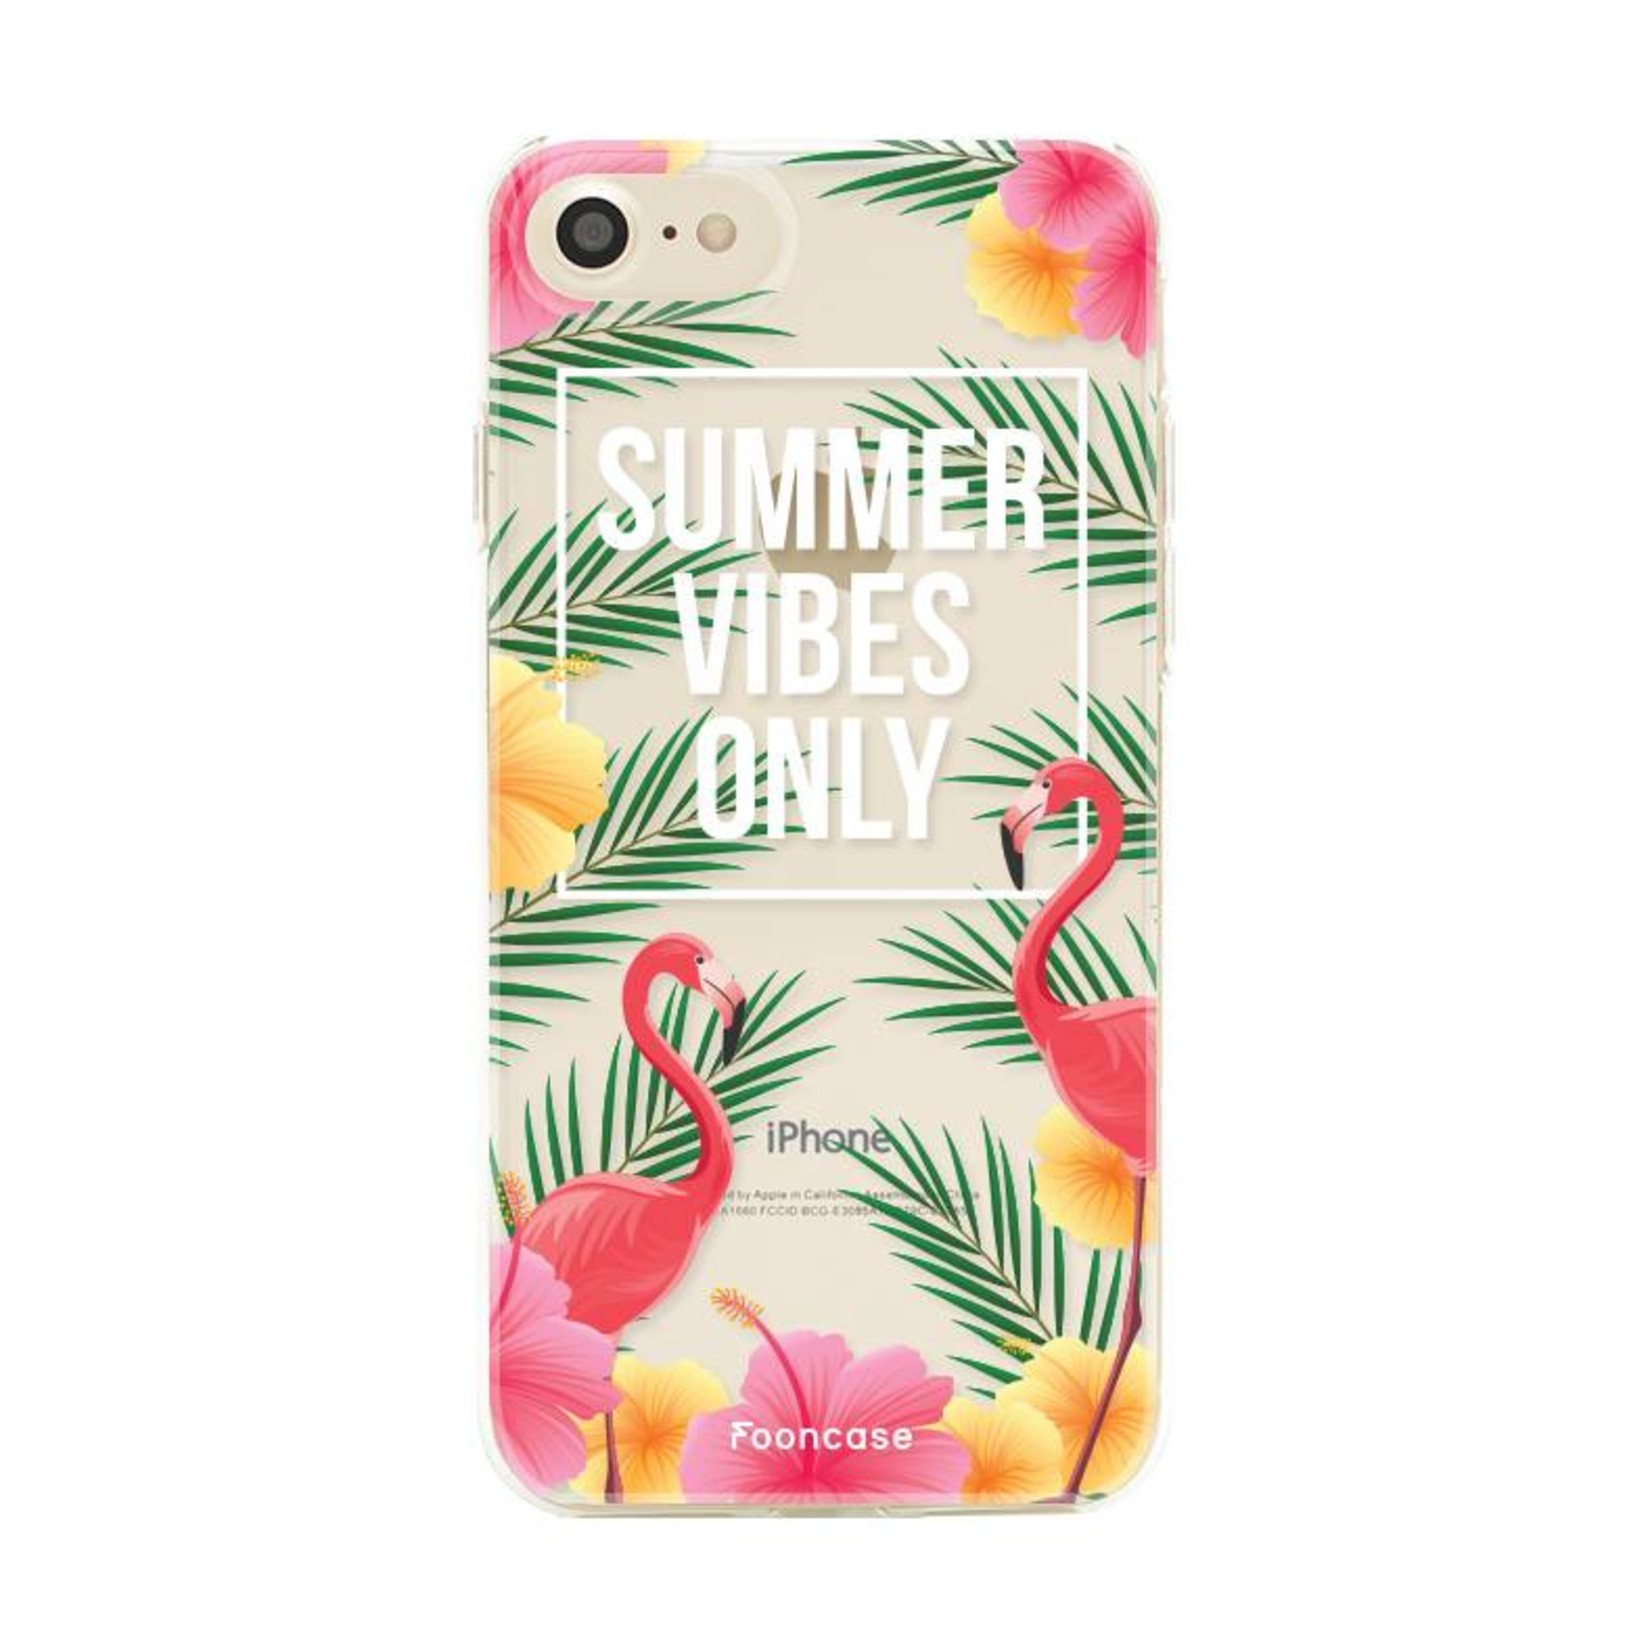 FOONCASE iPhone SE (2020) Handyhülle - Summer Vibes Only